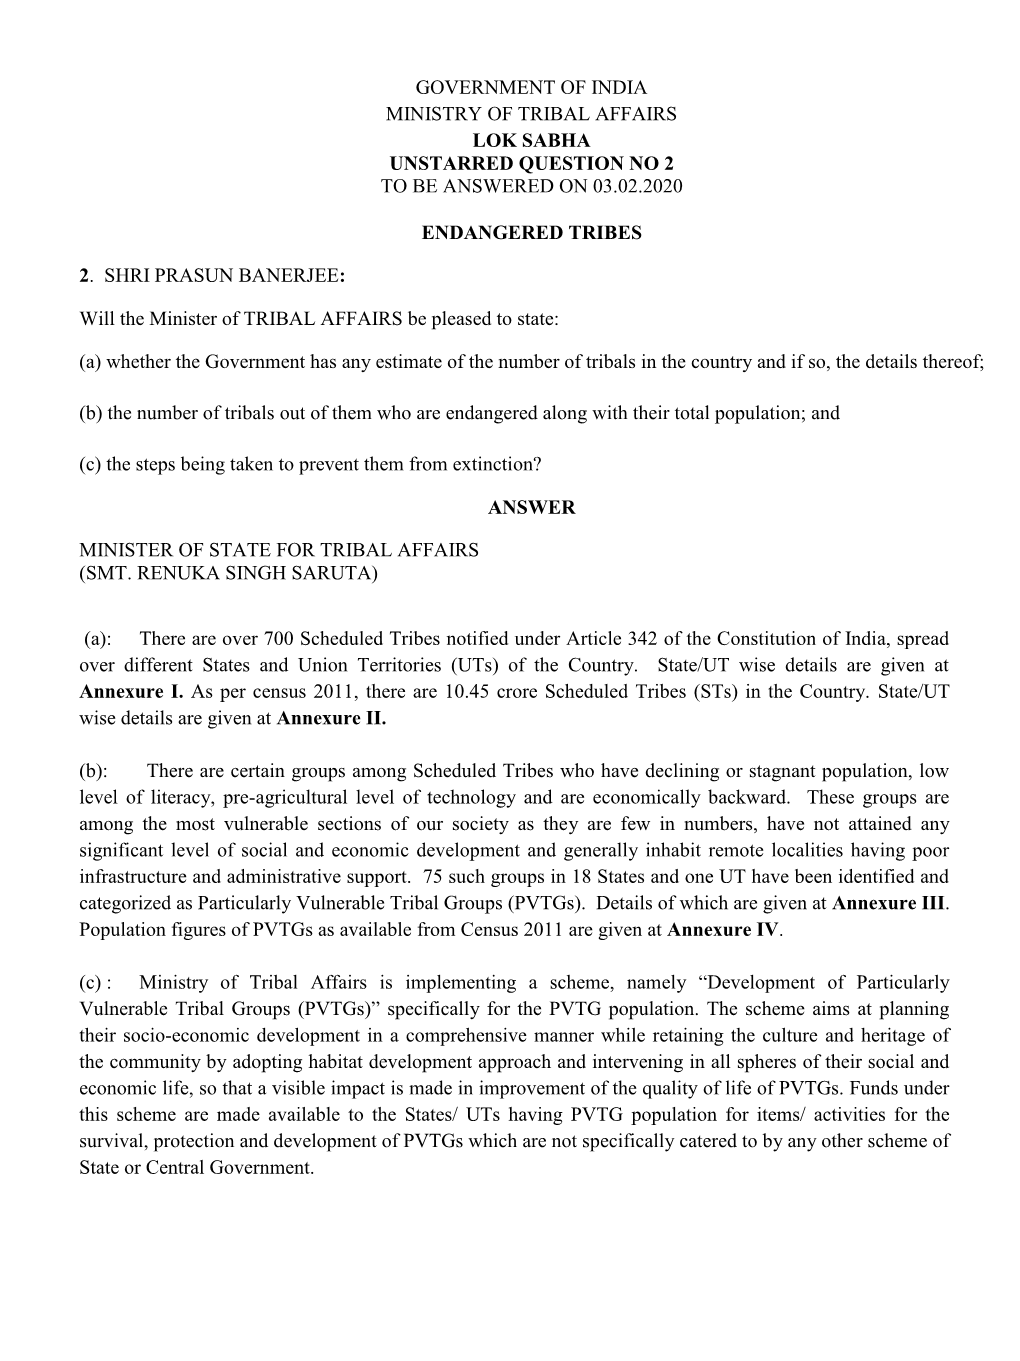 Government of India Ministry of Tribal Affairs Lok Sabha Unstarred Question No 2 to Be Answered on 03.02.2020